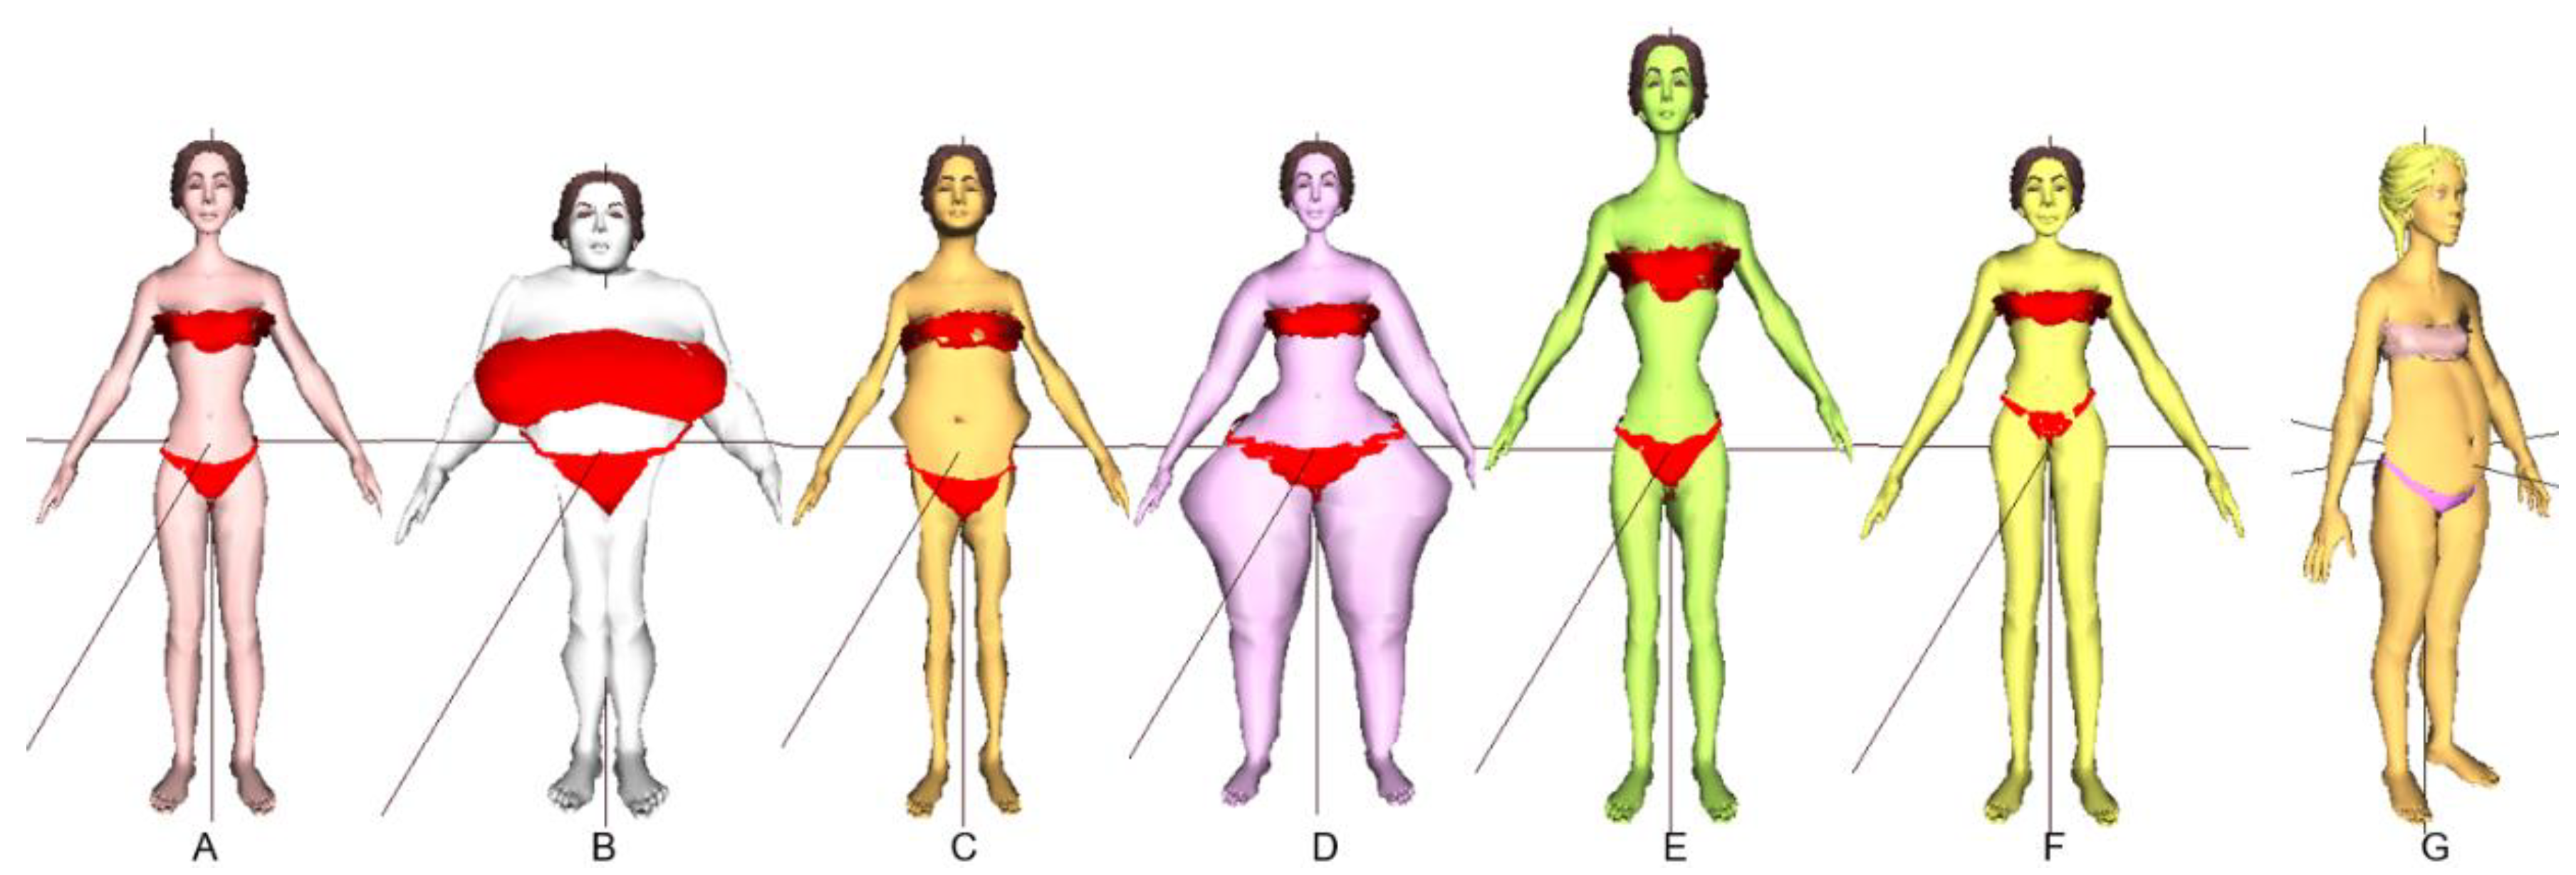 Sensors | Free Full-Text | Simulation of 3D Body Shapes for Pregnant and  Postpartum Women